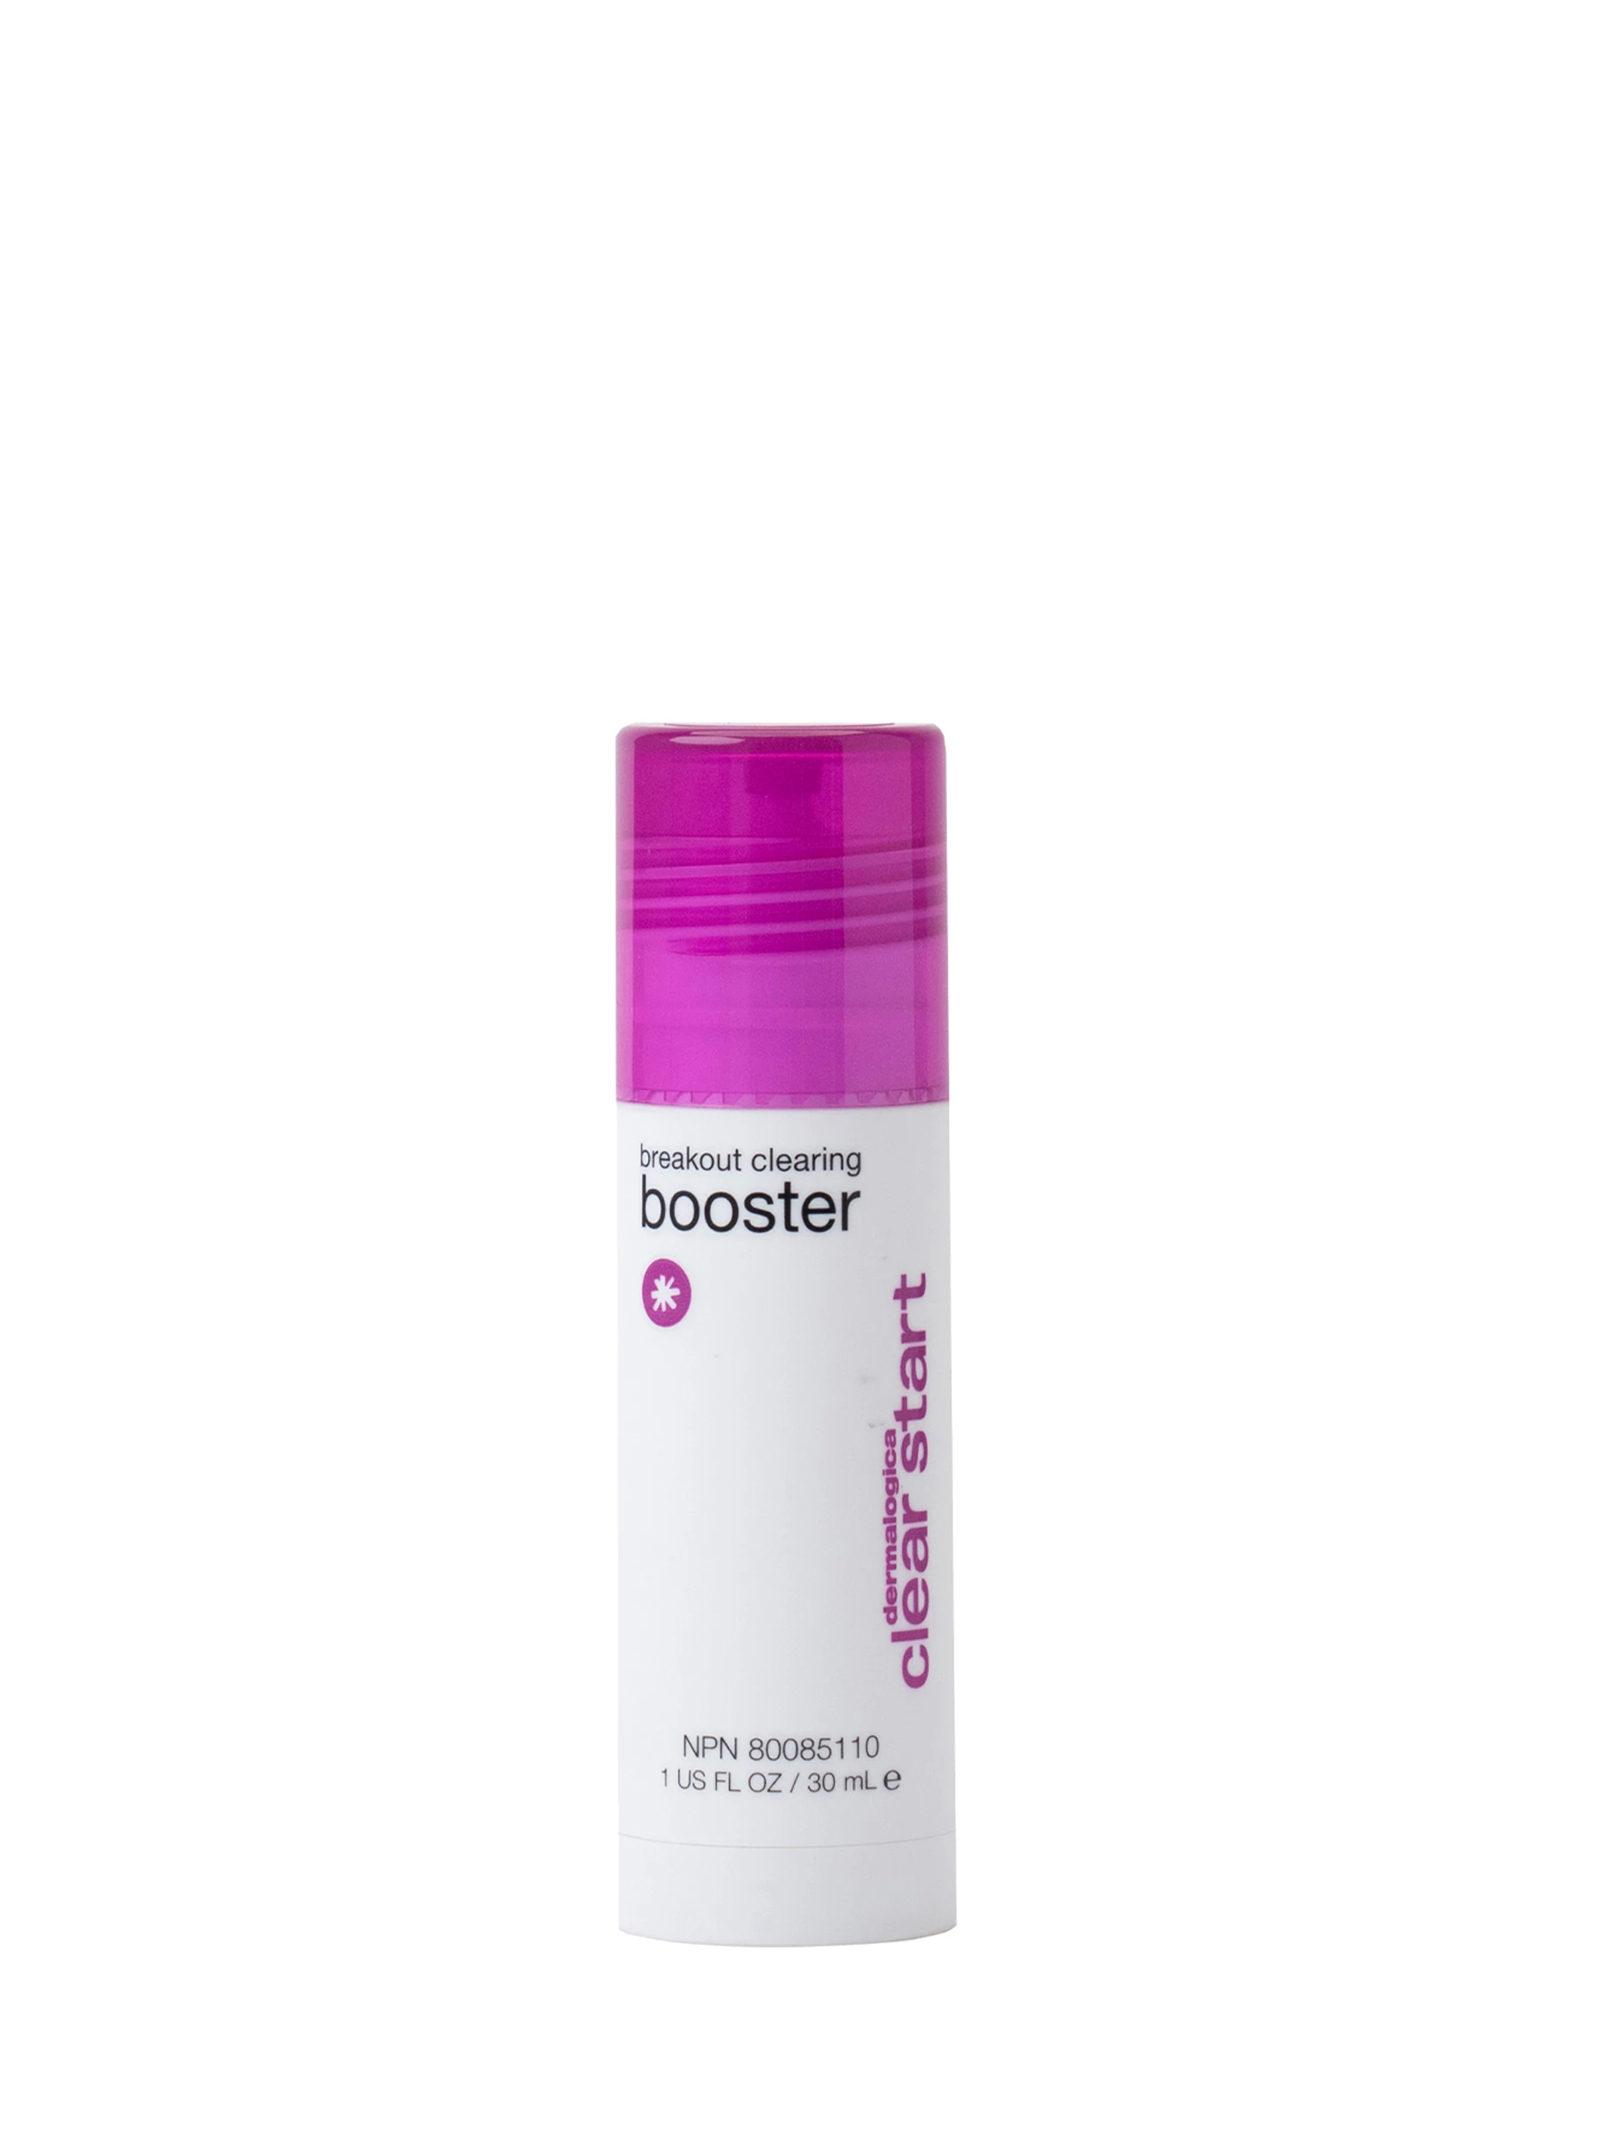 breakout-clearing-booster,-30-ml